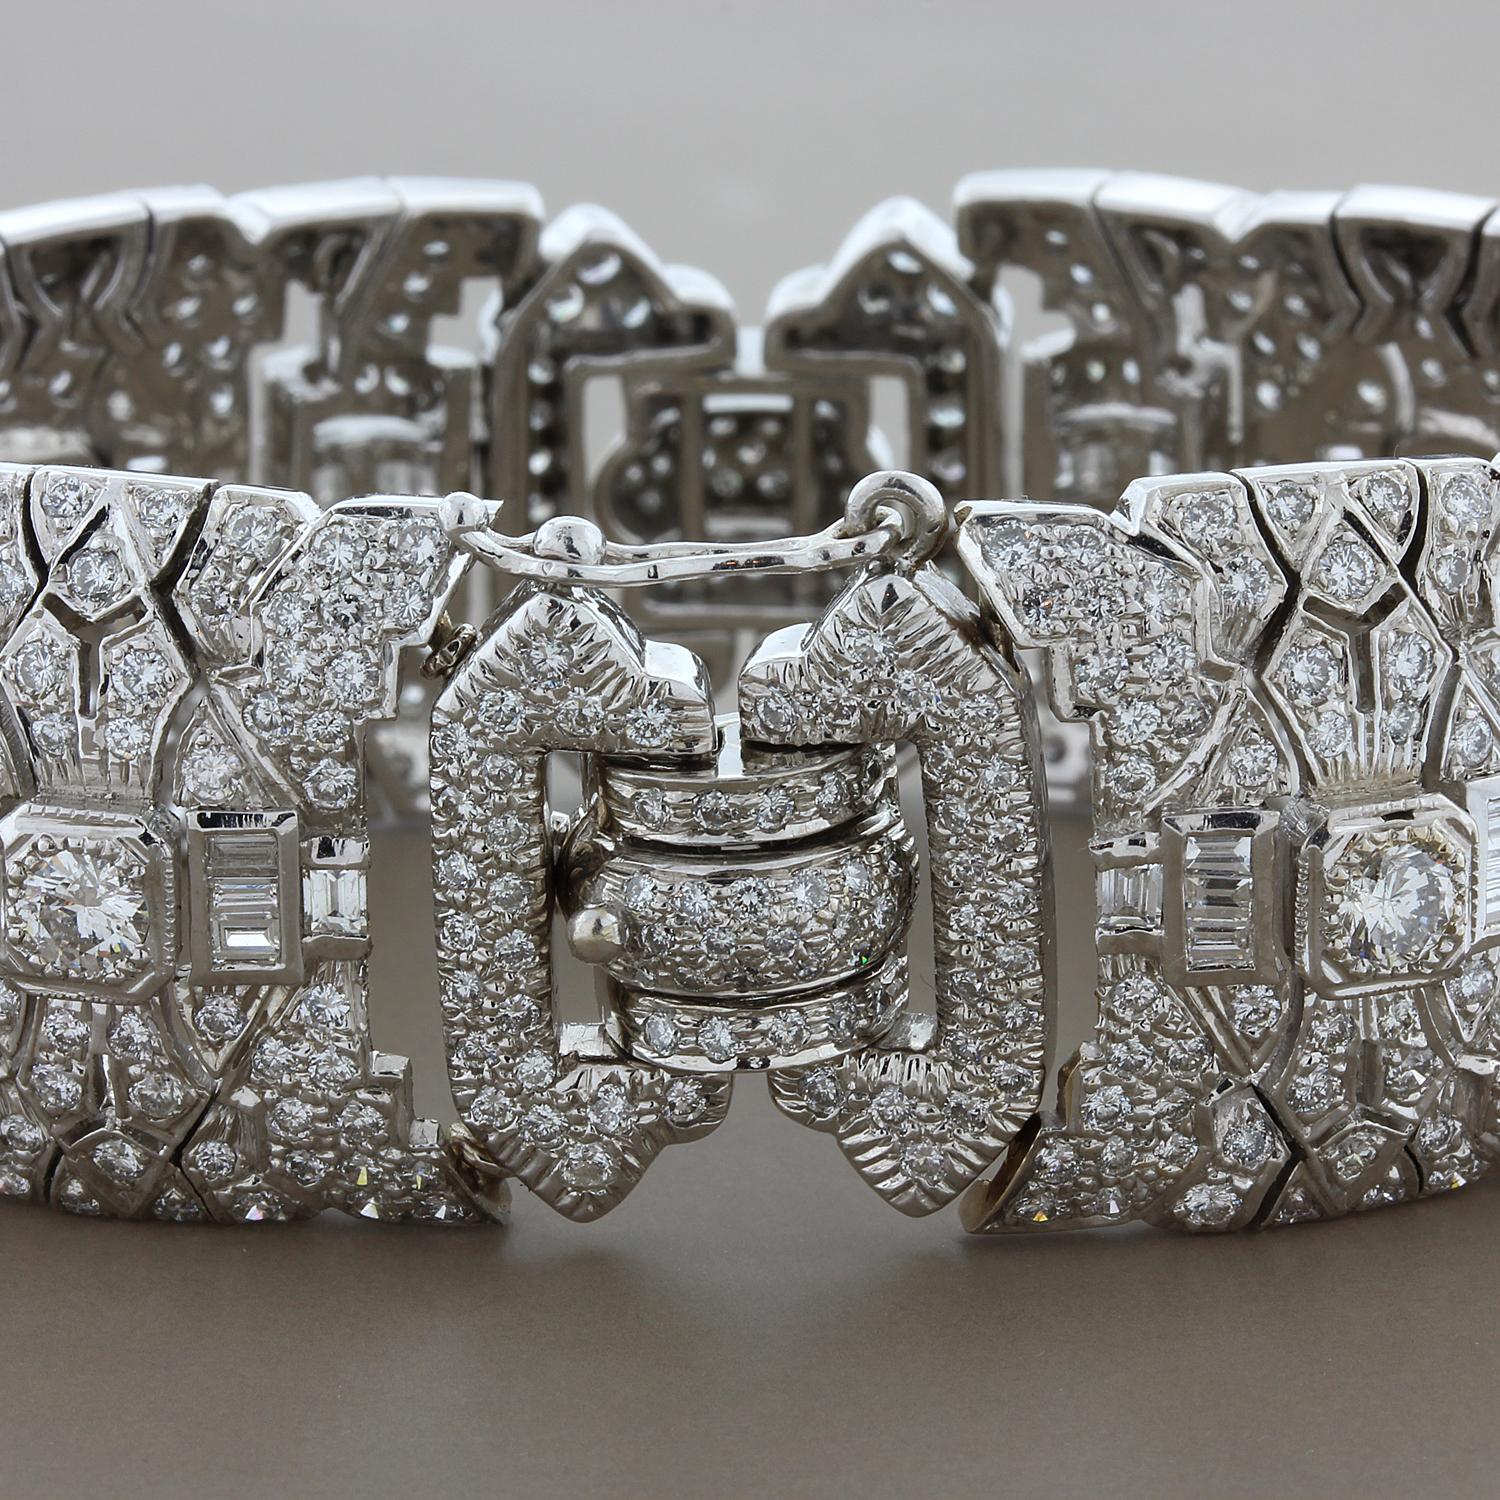 This captivating estate bracelet features approximately 10 carats of round and baguette cut diamonds in an antique Art Deco style. Set in 18K white gold, the bracelet has a seamless finish with the diamonds going around full circle and a safety